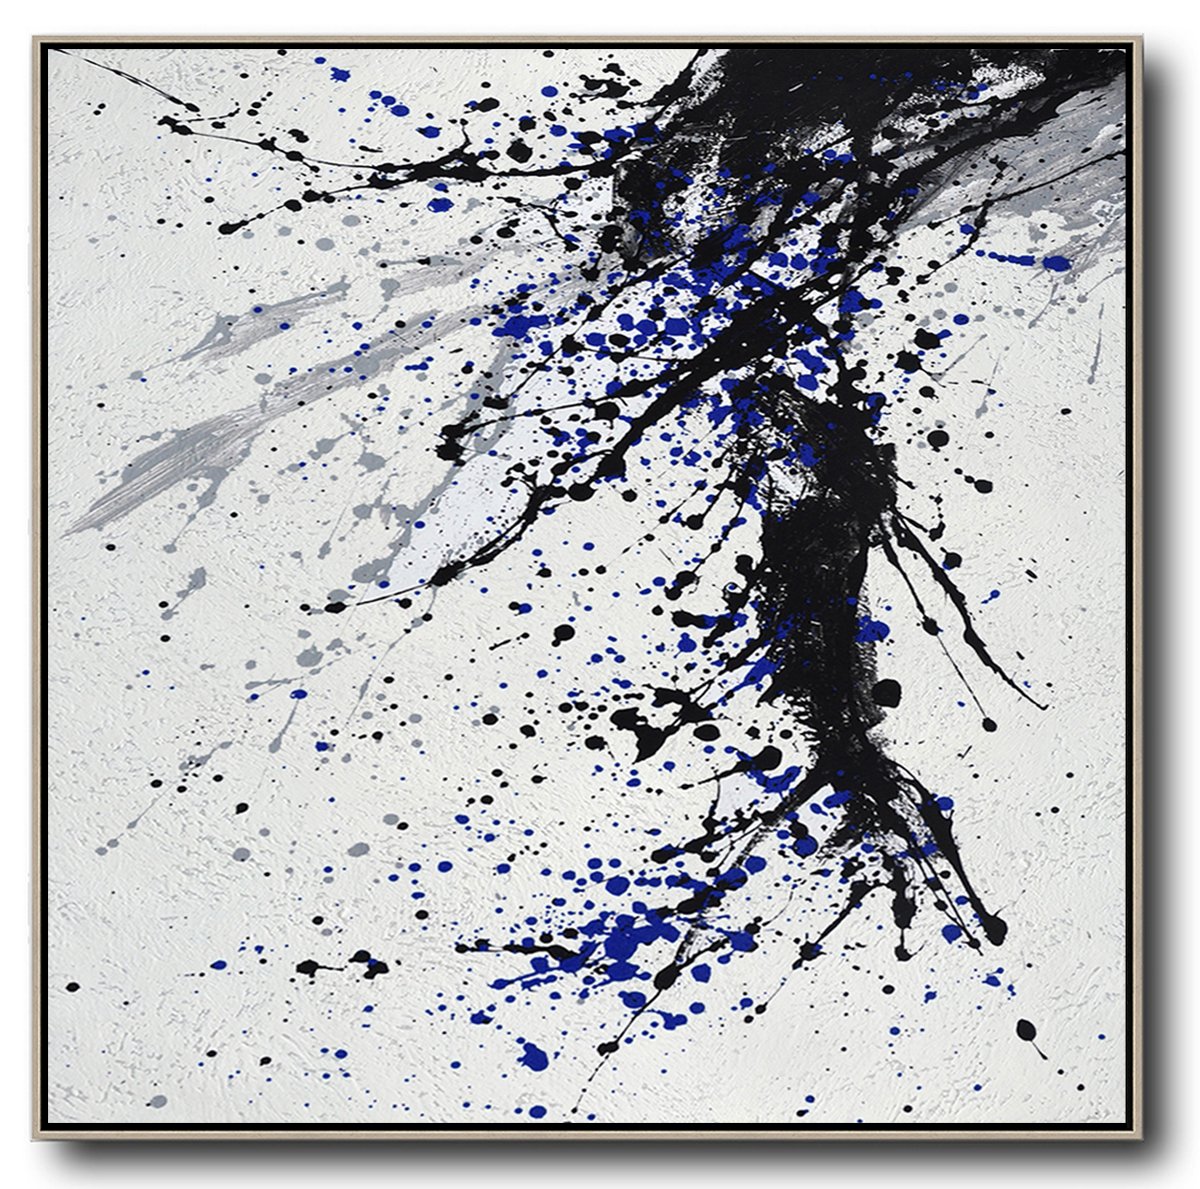 Hand-Painted Minimalist Drip Painting On Canvas, Black, White, Grey, Blue - Abstract Art Blue And Gray Foyer Large